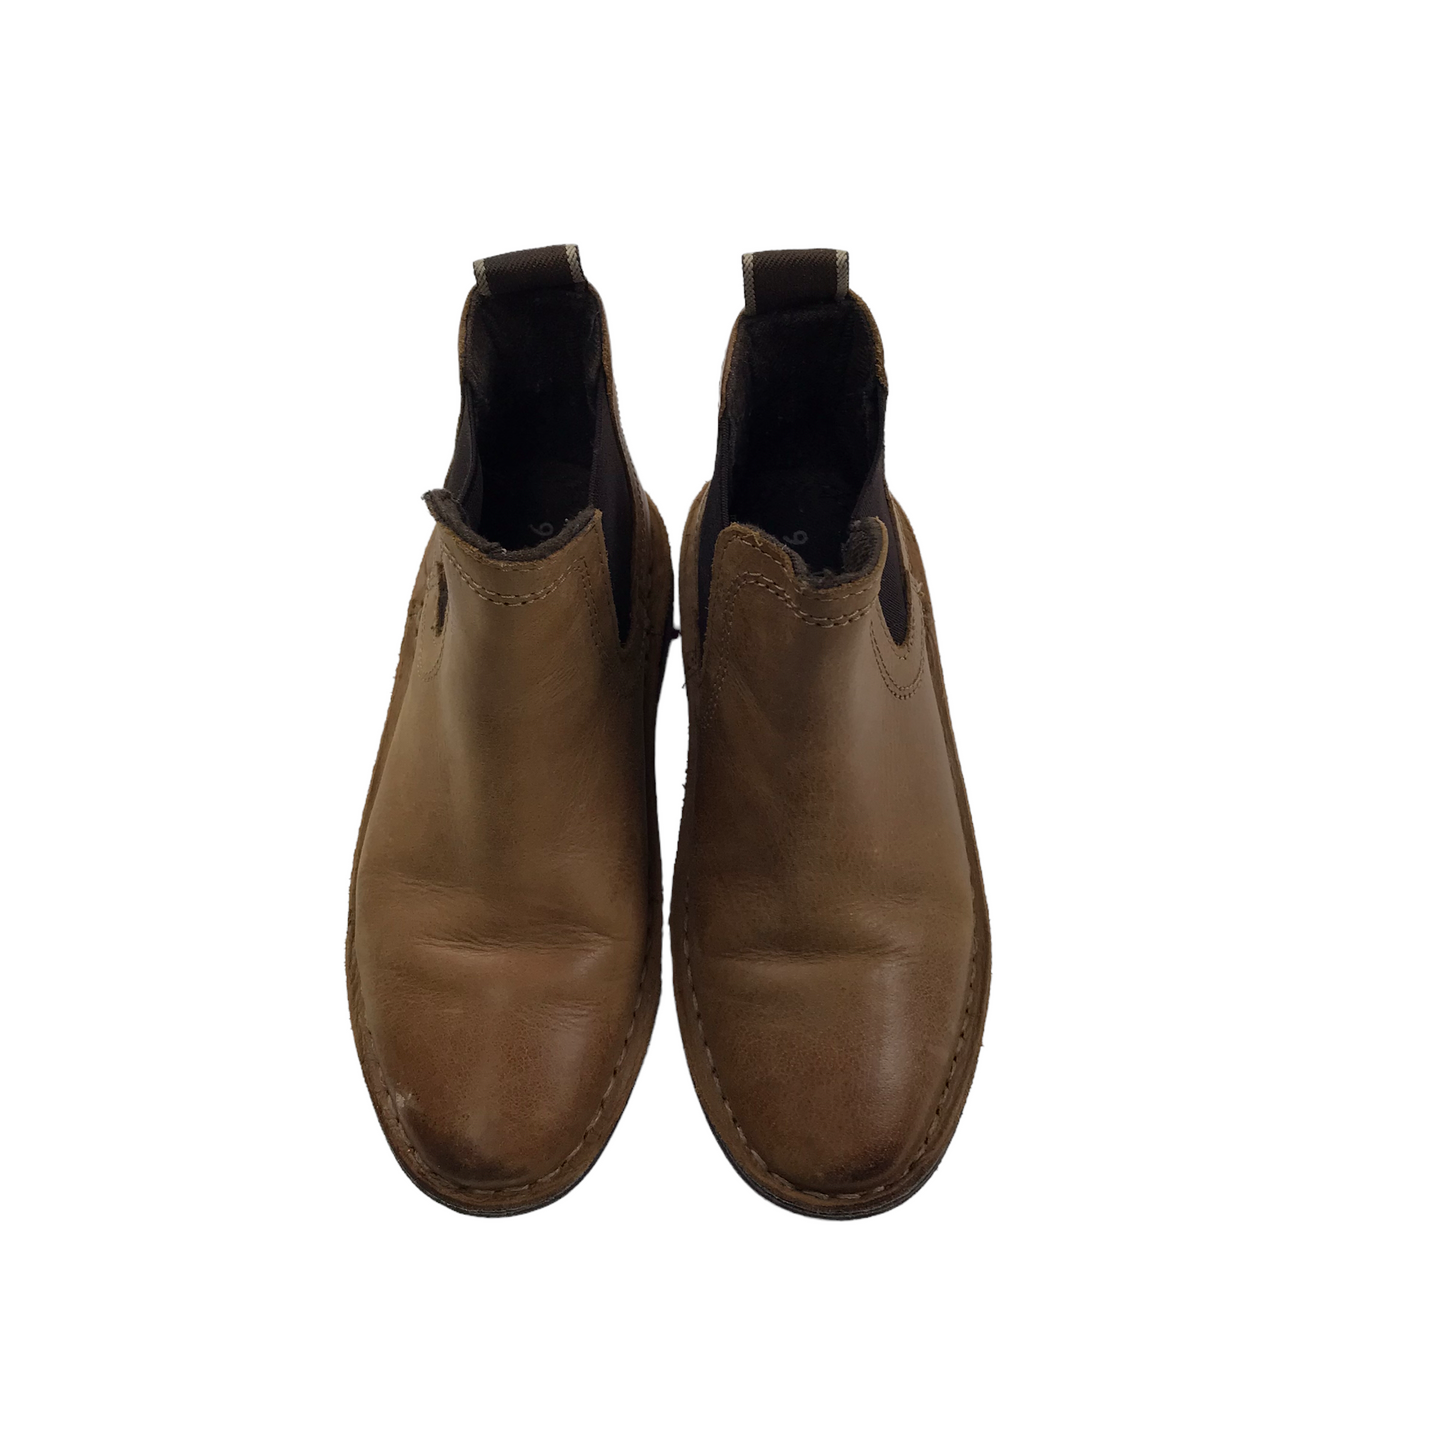 Next Tanned Brown Chelsea Boots Shoe Size 9 junior